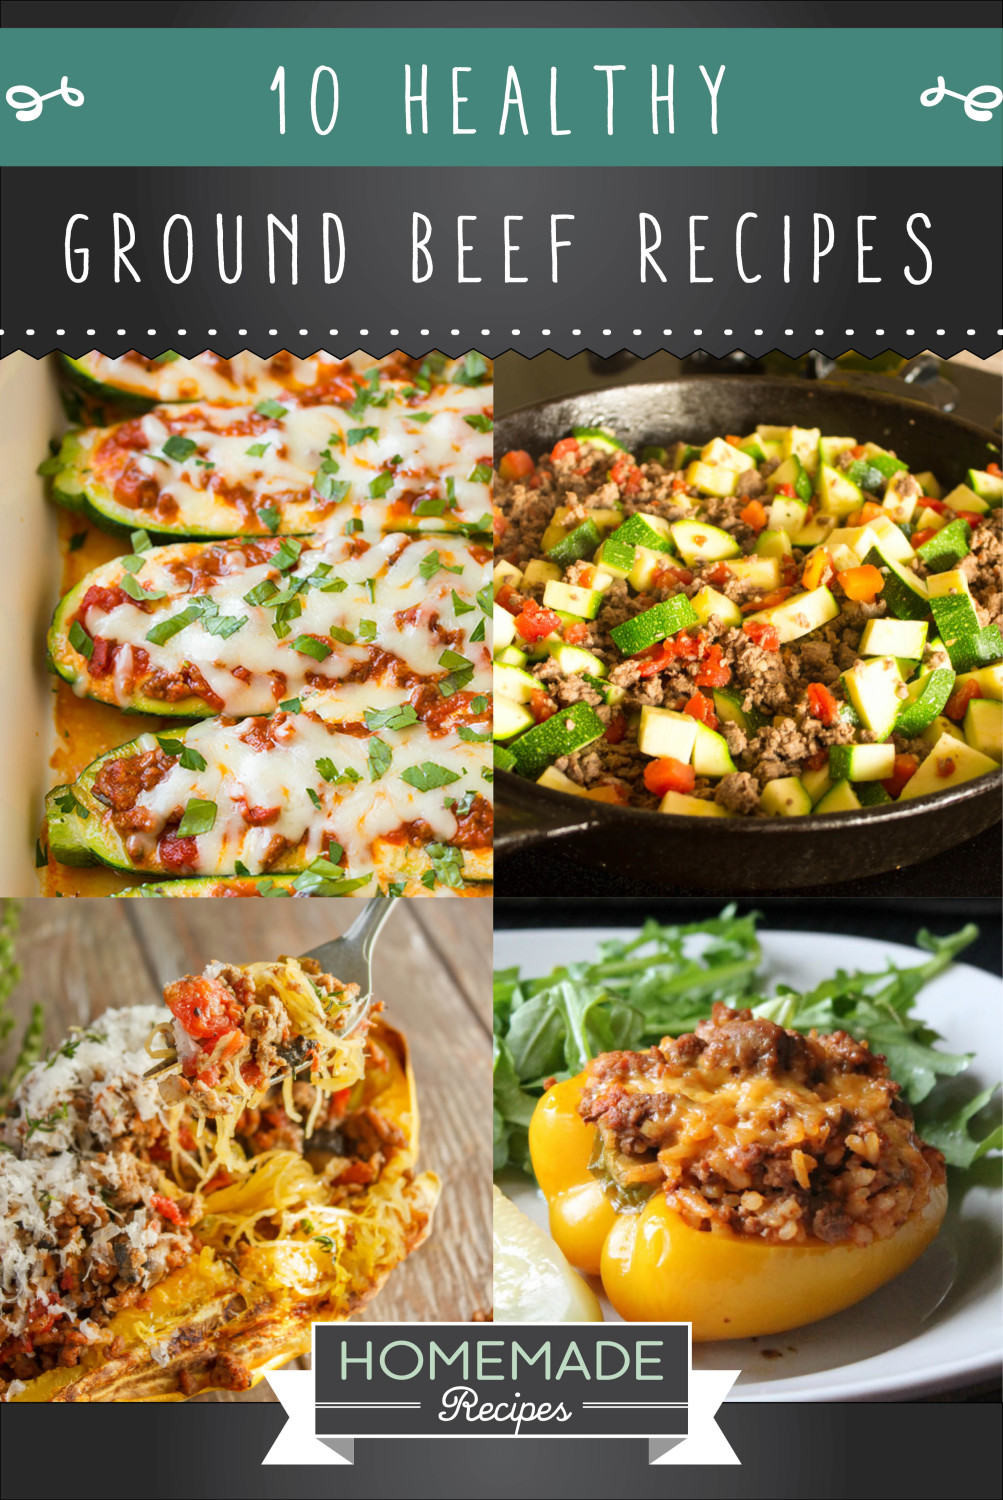 Healthy Meals Using Ground Beef
 10 Healthy Ground Beef Recipes